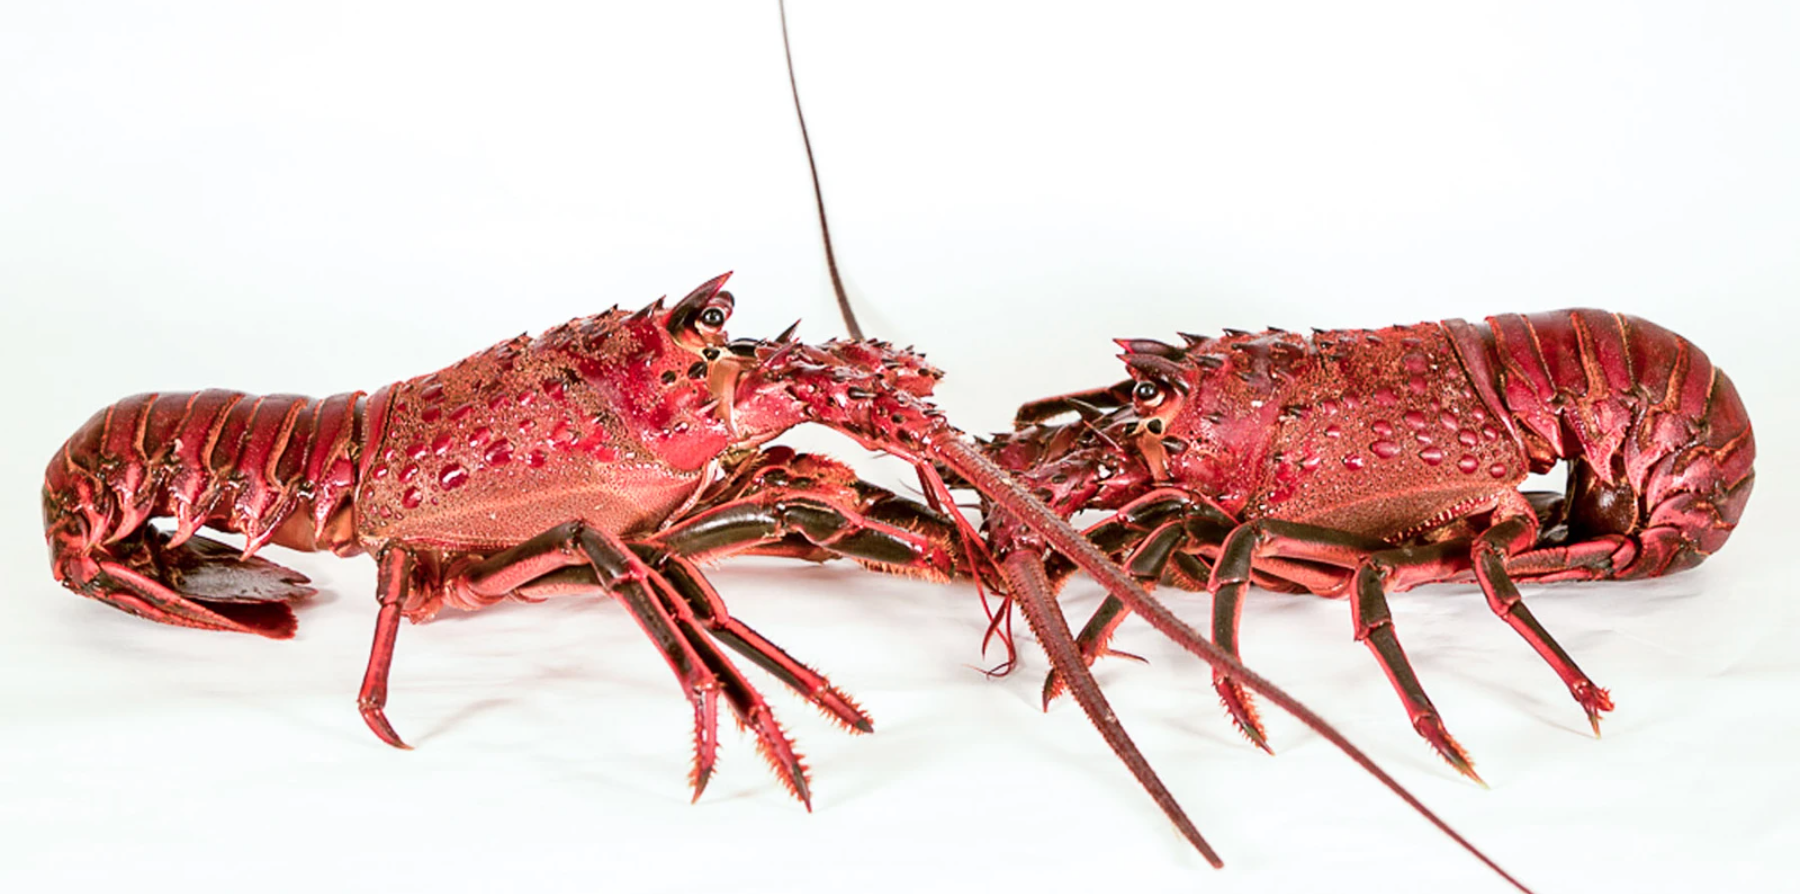 Two California spiny lobsters facing each other, looking somewhat like dragons, on a white background